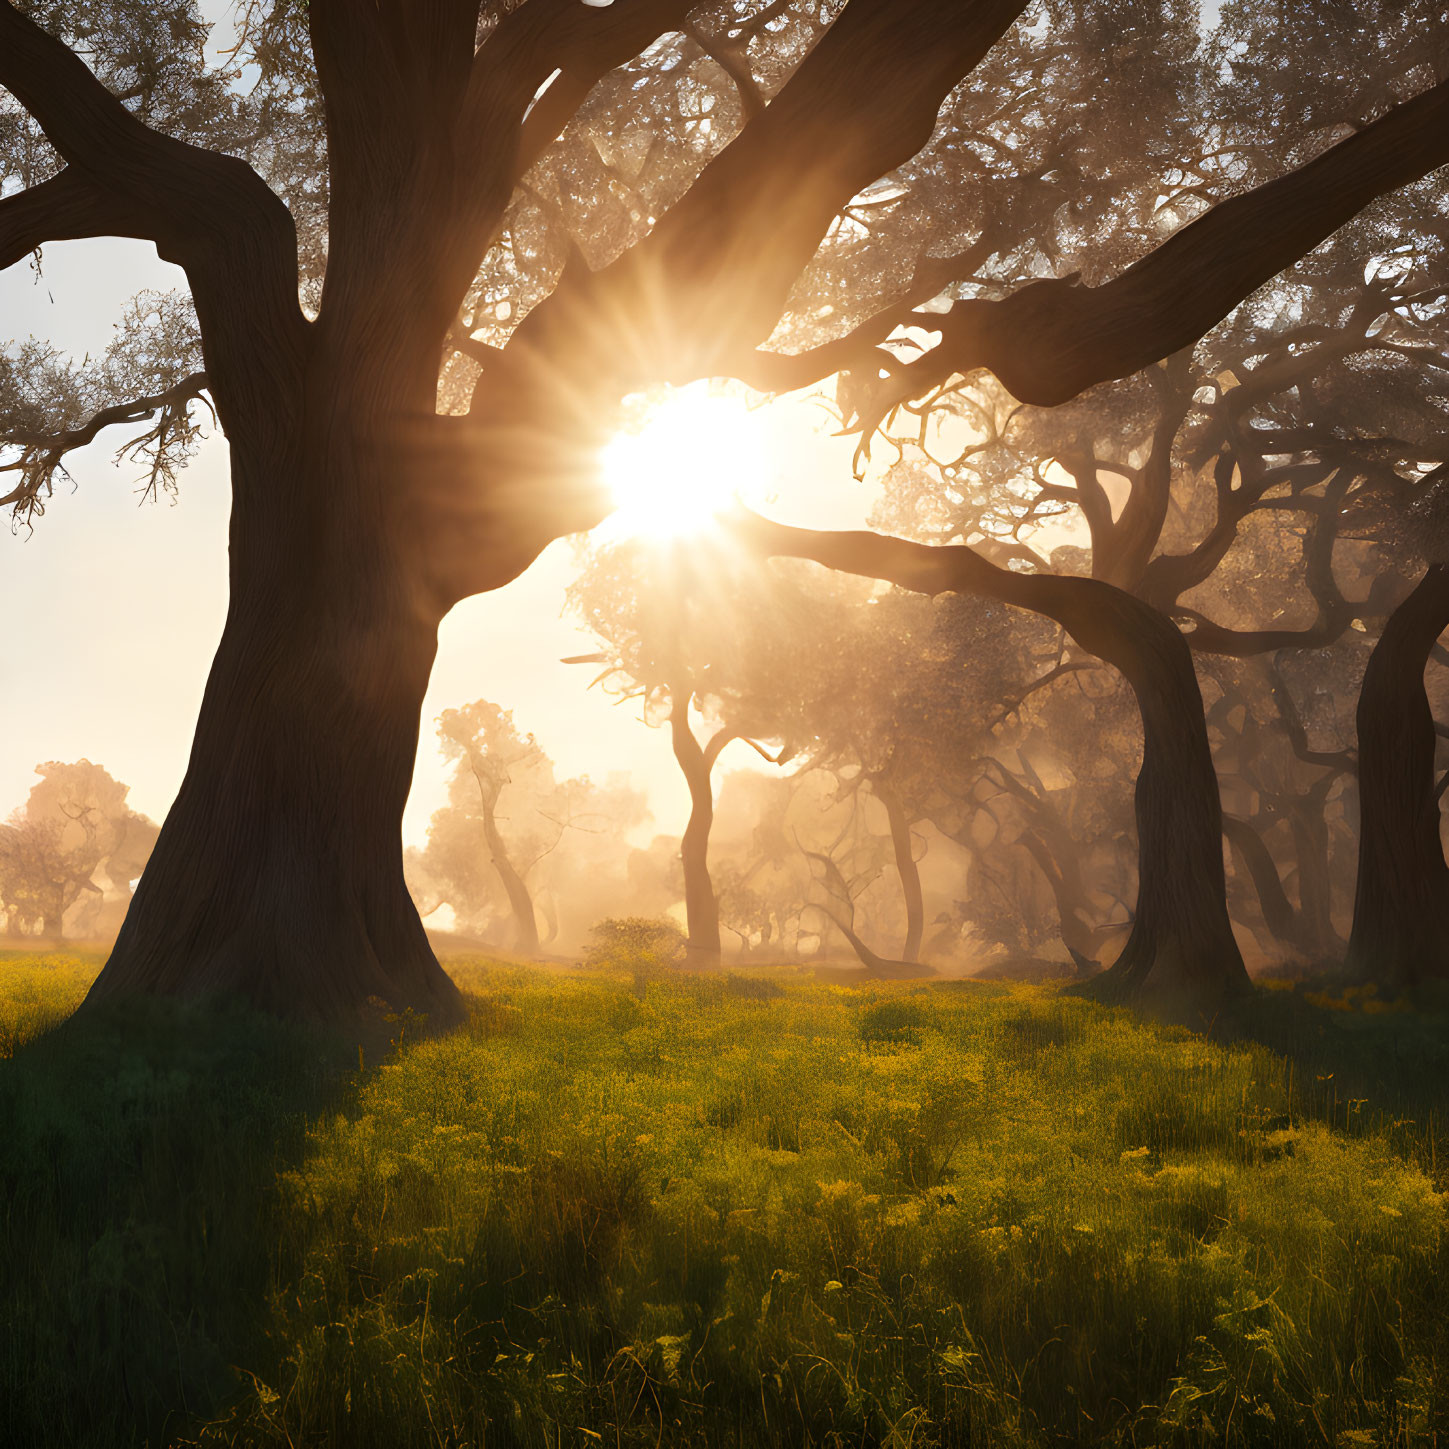 Ancient forest with twisted trees and lush green grass under sunlight